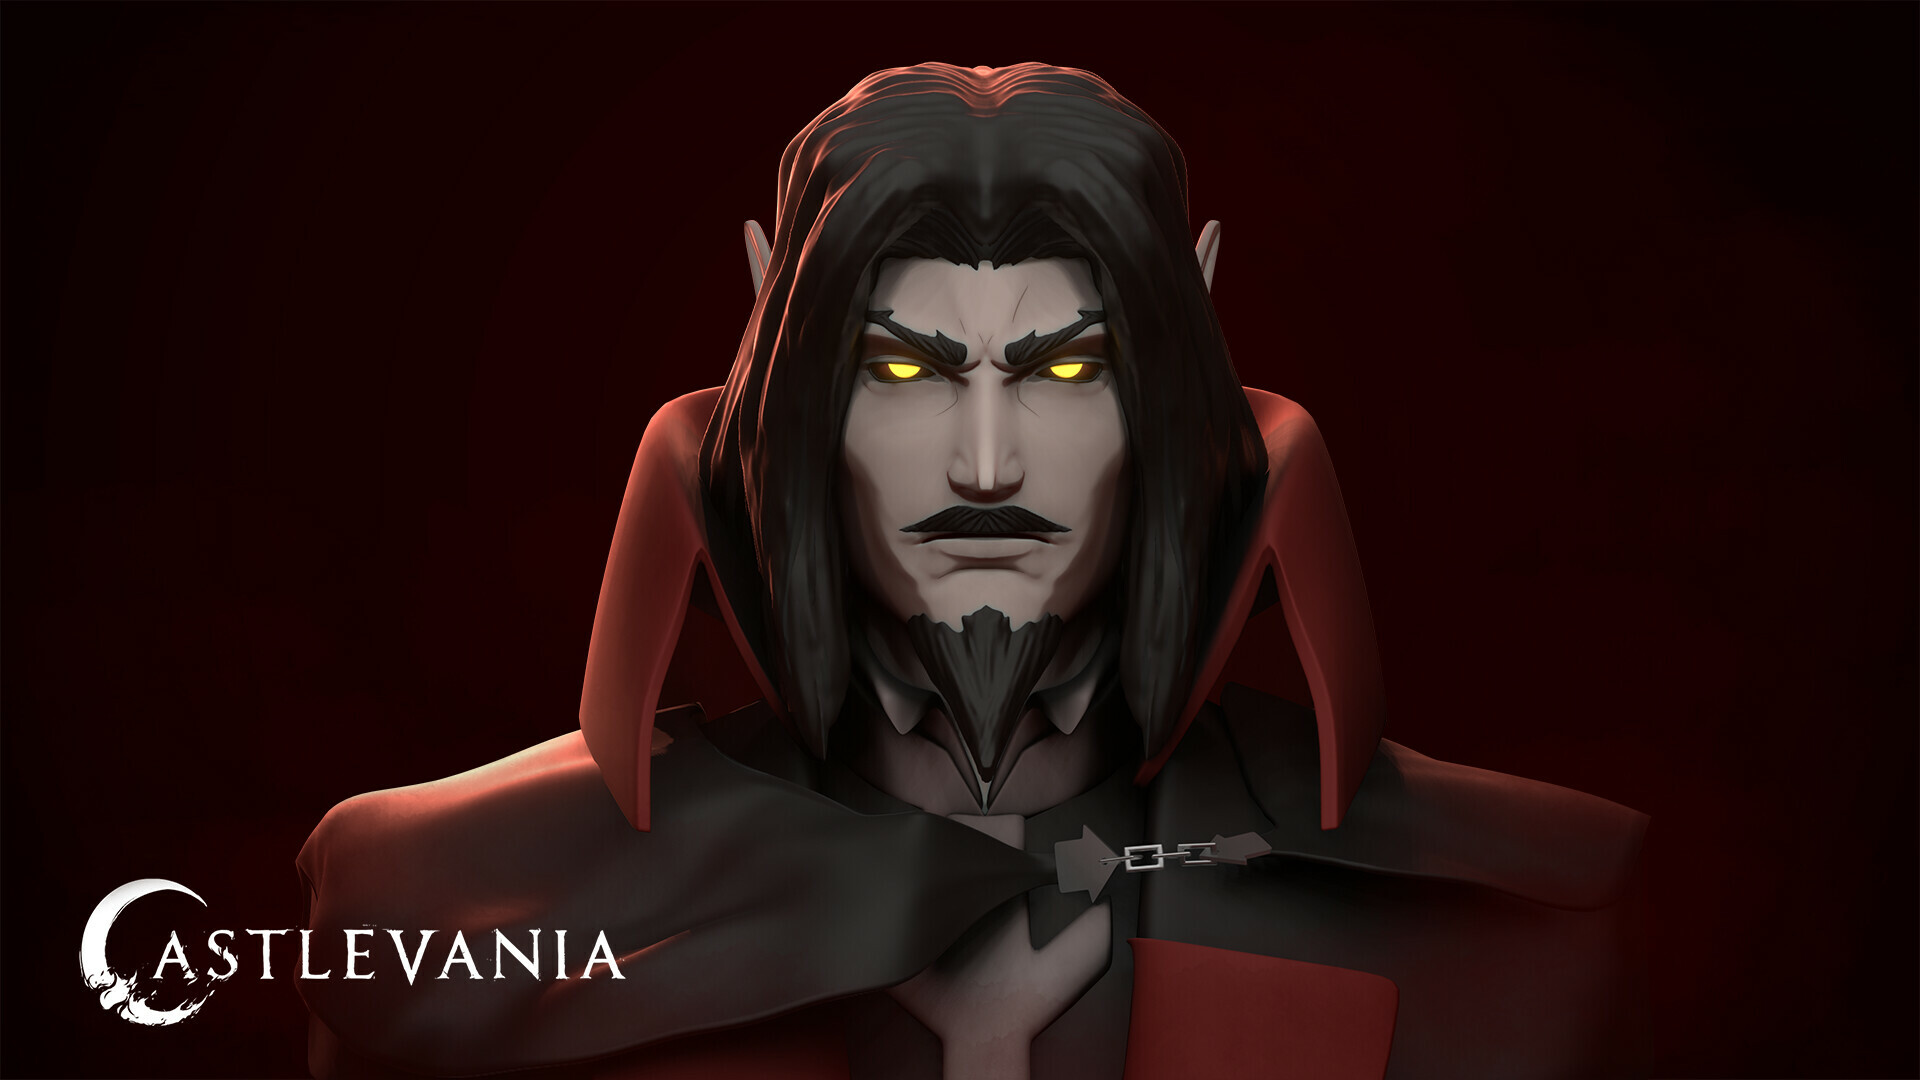 Castlevania (Netflix): Count Vlad Dracula Tepes, The main antagonist of the Netflix animated series. 1920x1080 Full HD Background.